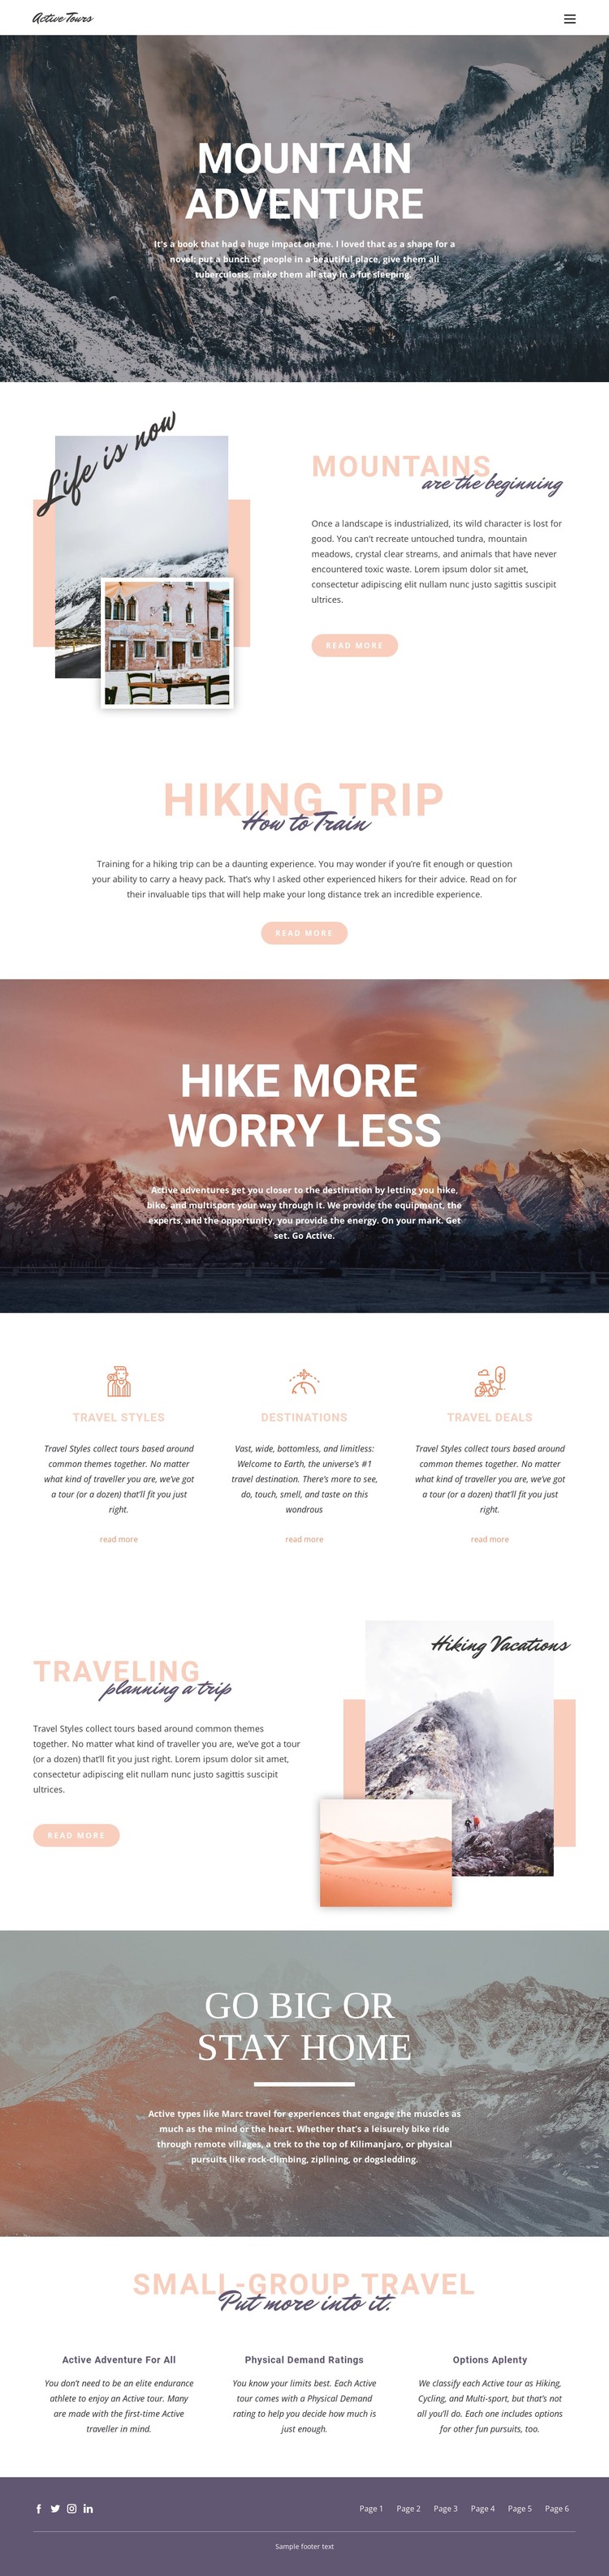 Guided backpacking trips CSS Template